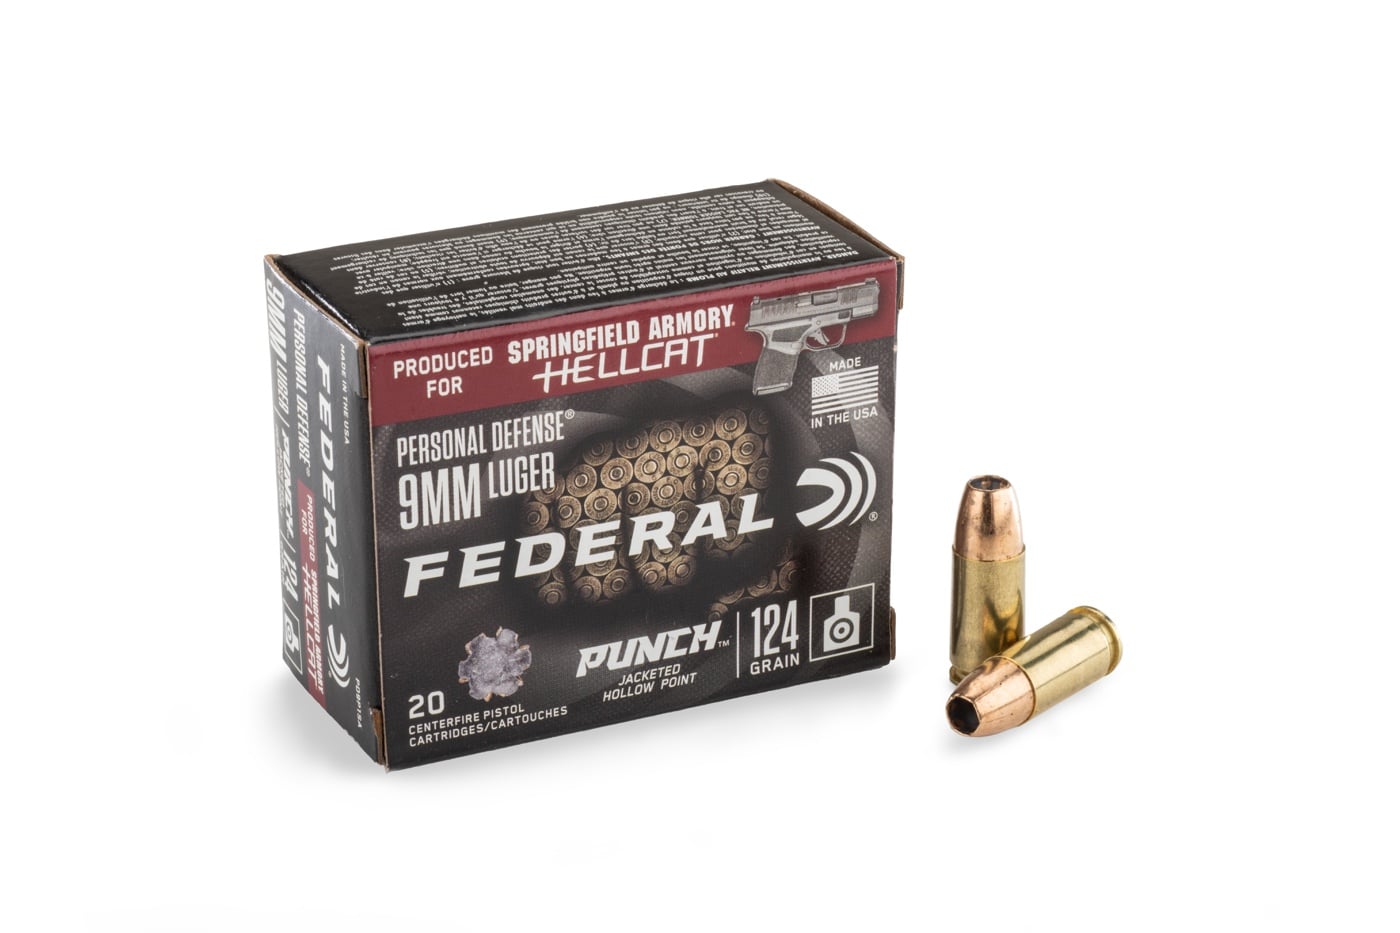 In this photo you see a commercial box of the Federal Punch defensive ammunition. It is the 124-grain JHP load developed for the Springfield Hellcat handgun. It is designed for self defense and personal protection.